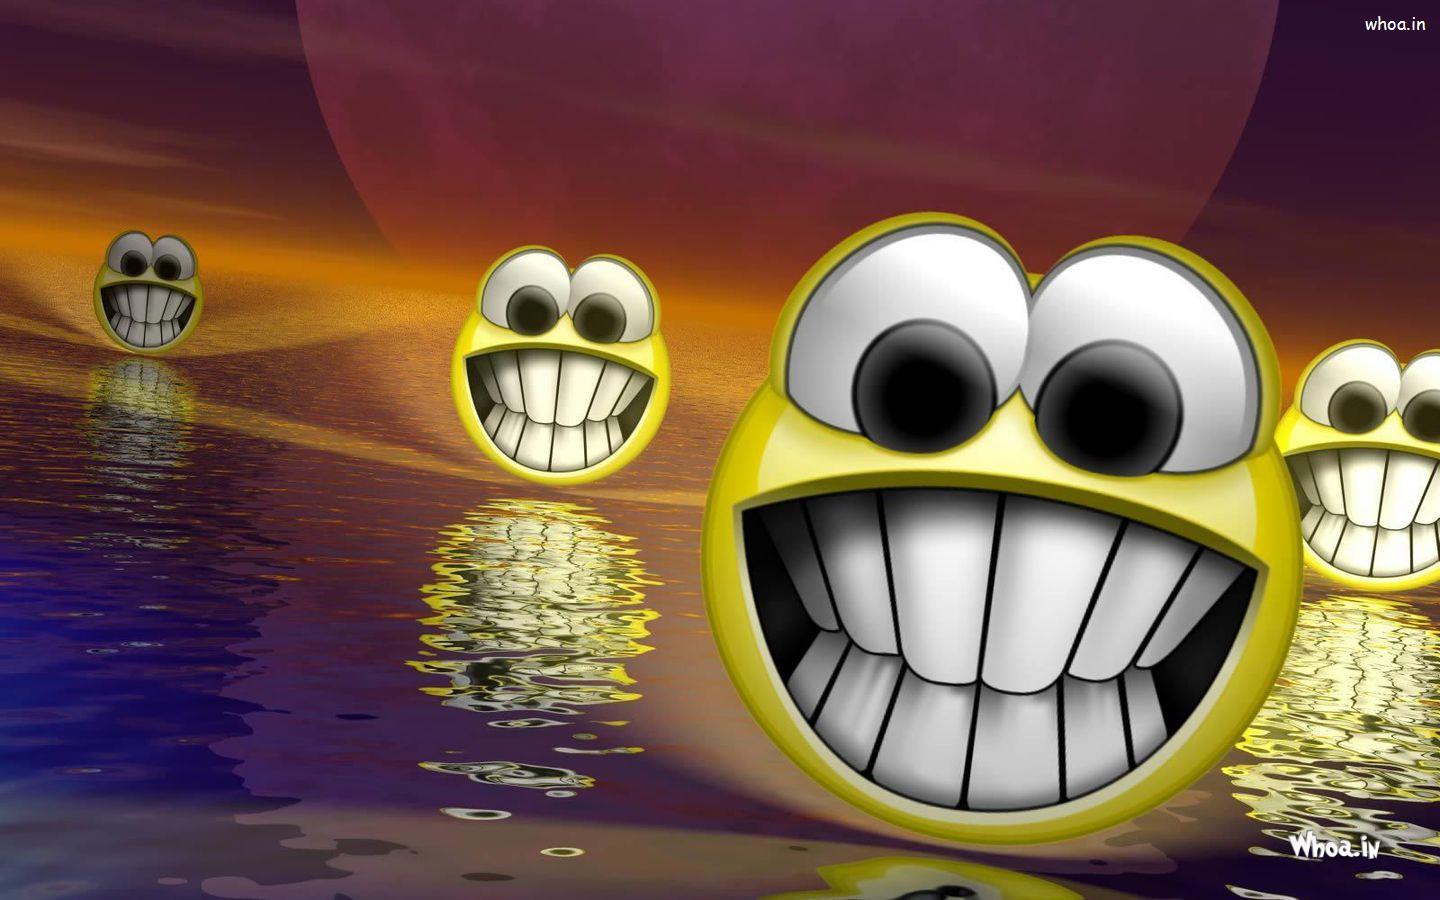 World Laughter Day Greetings Images & Wallpapers Laughter Day #4 World- Laughter-Day Wallpaper